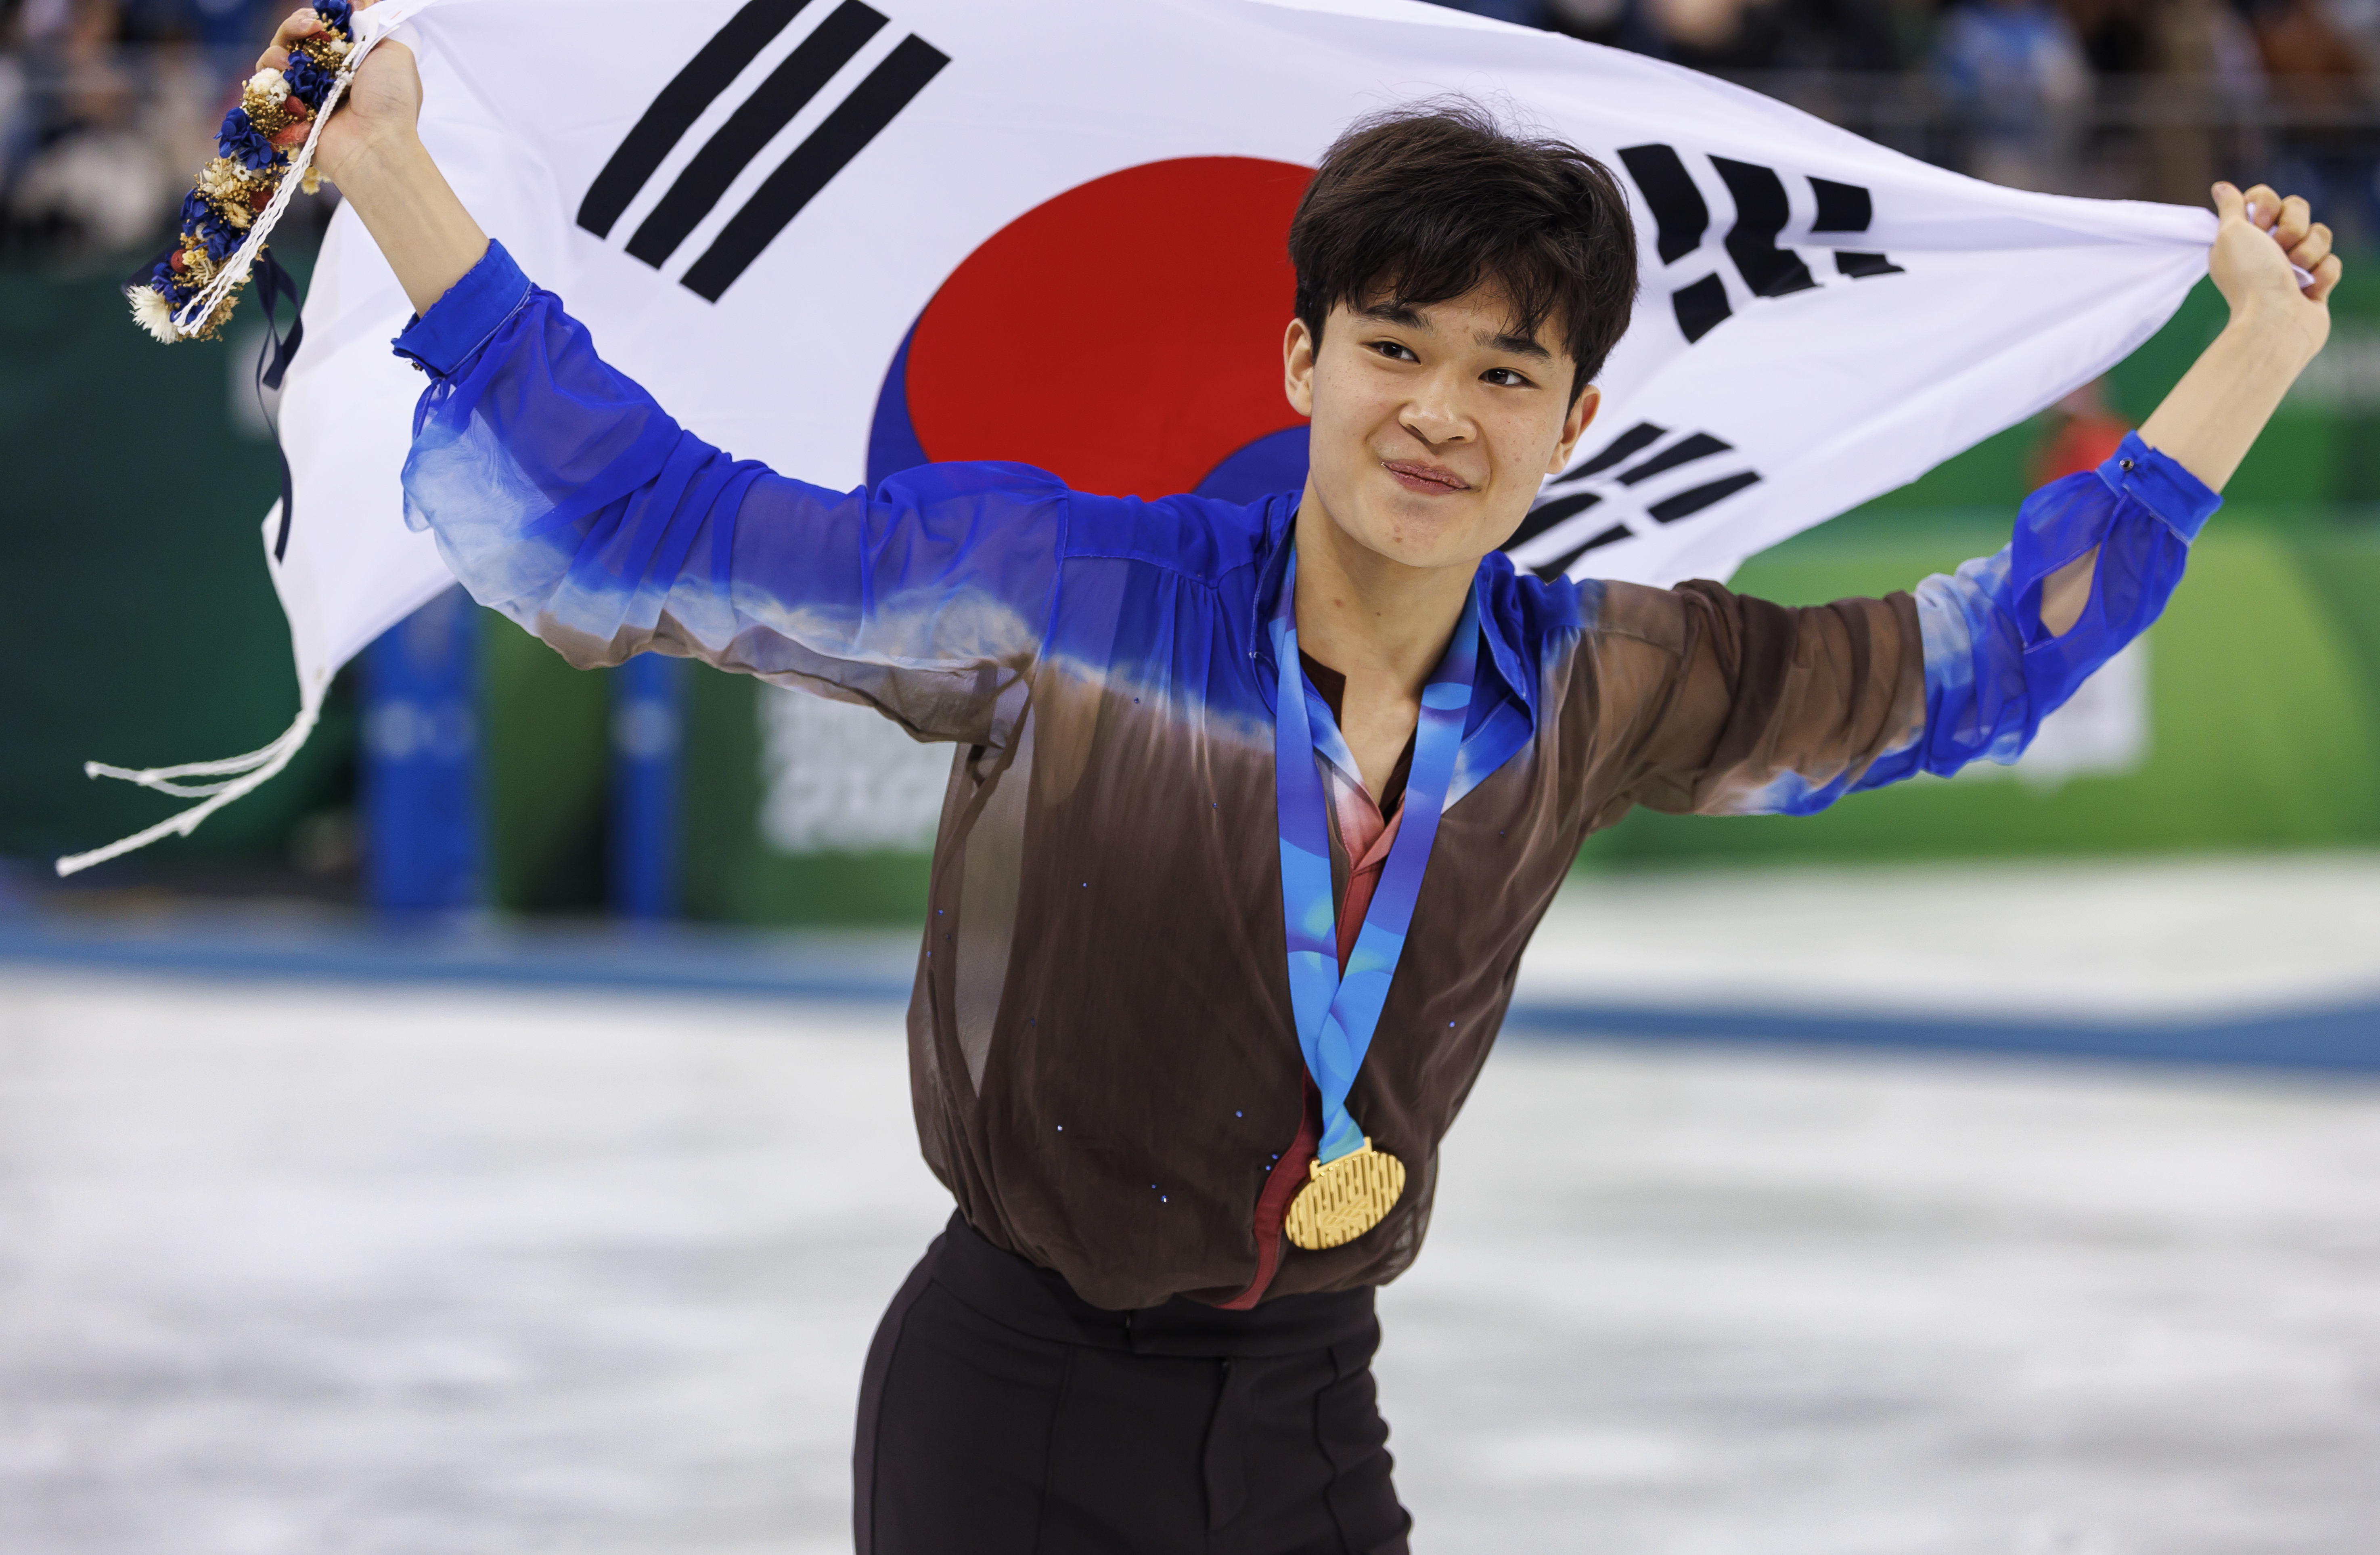 Gold medalist Kim Hyungyeom (KOR) celebrates at the Gangneung Ice Arena on Monday